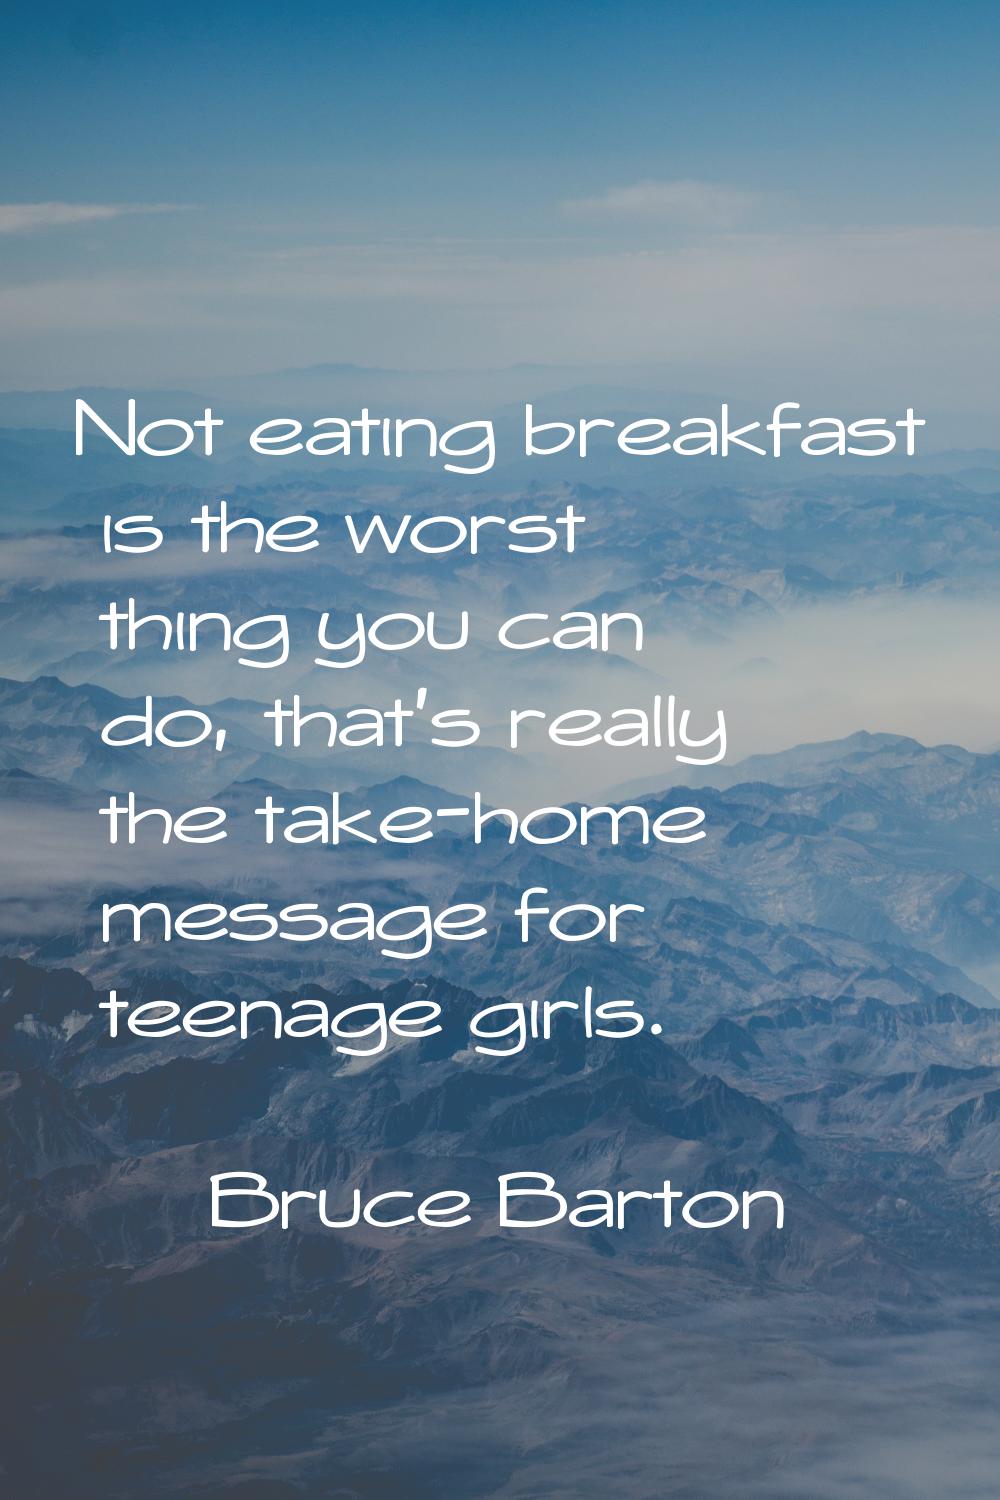 Not eating breakfast is the worst thing you can do, that's really the take-home message for teenage